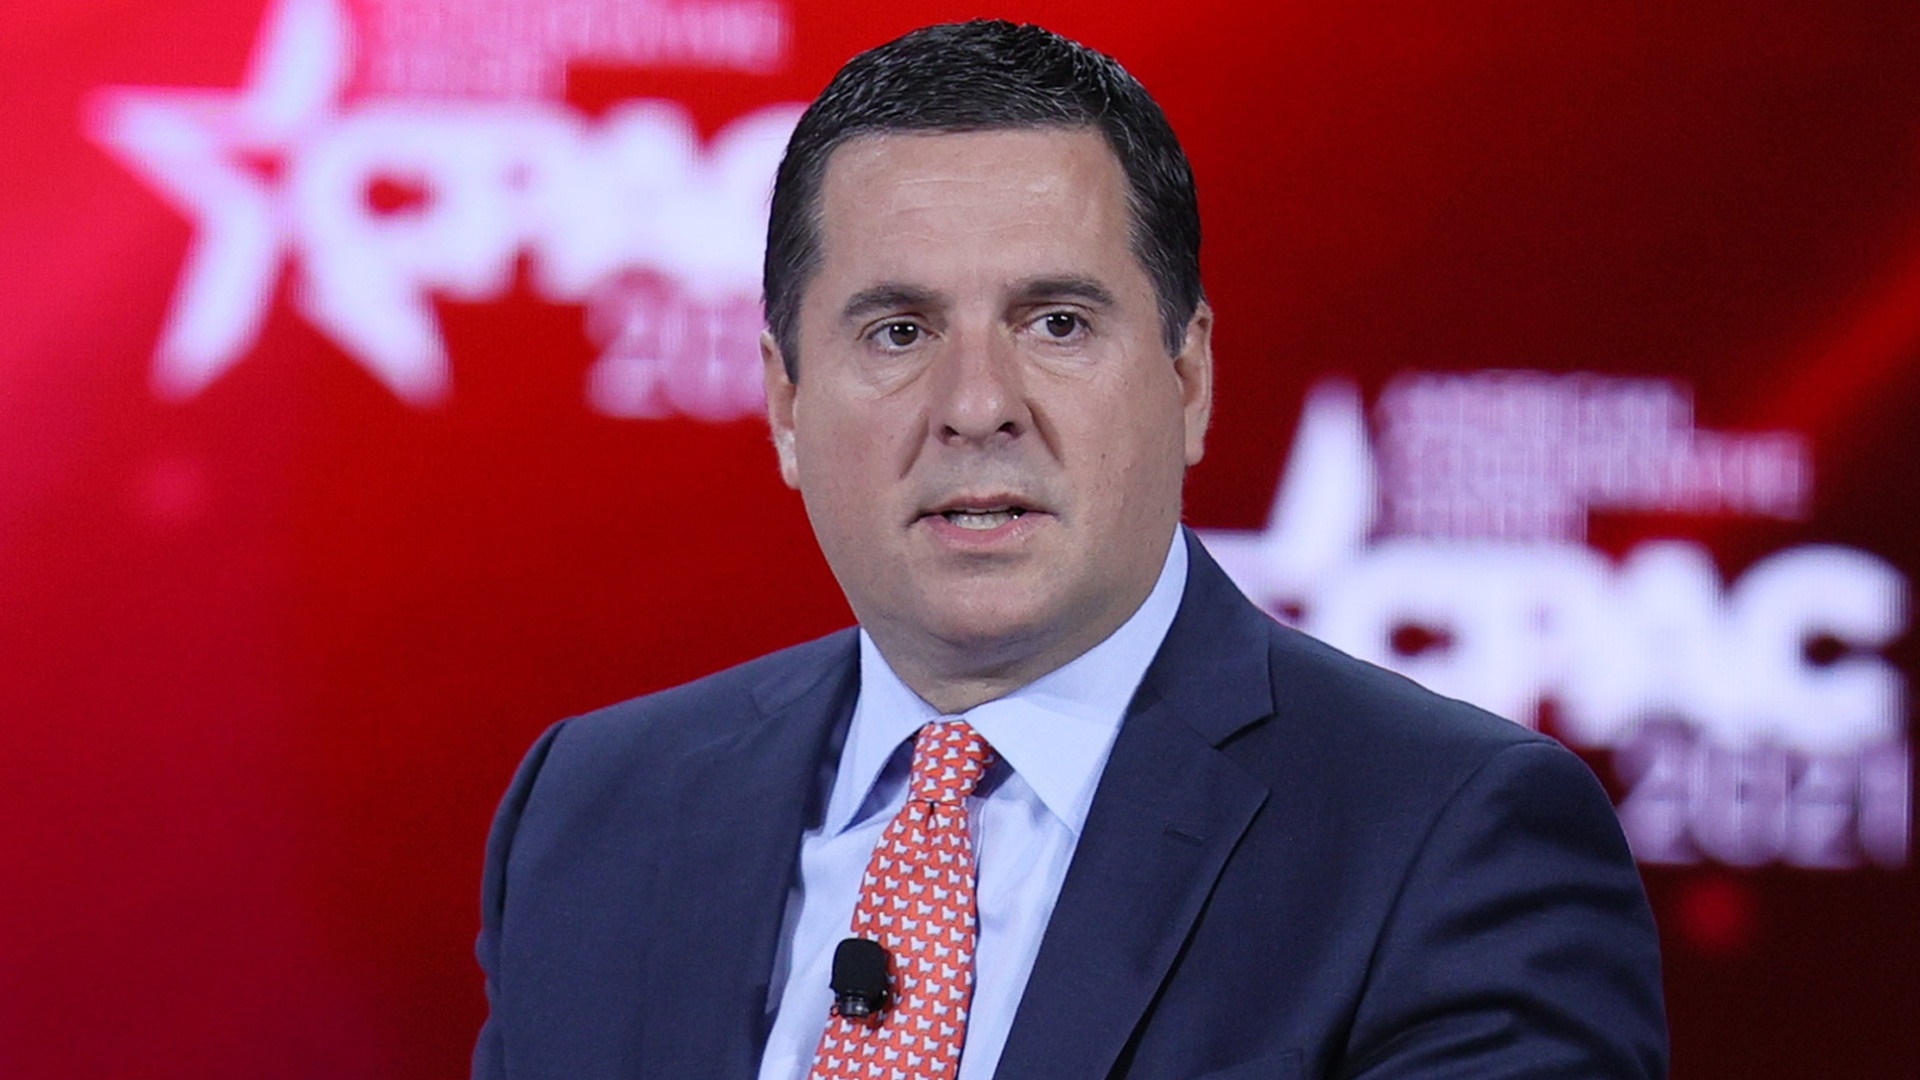 CPAC: Devin Nunes Says Pandemic Relief Bill Is a Slush Fund for Democrats